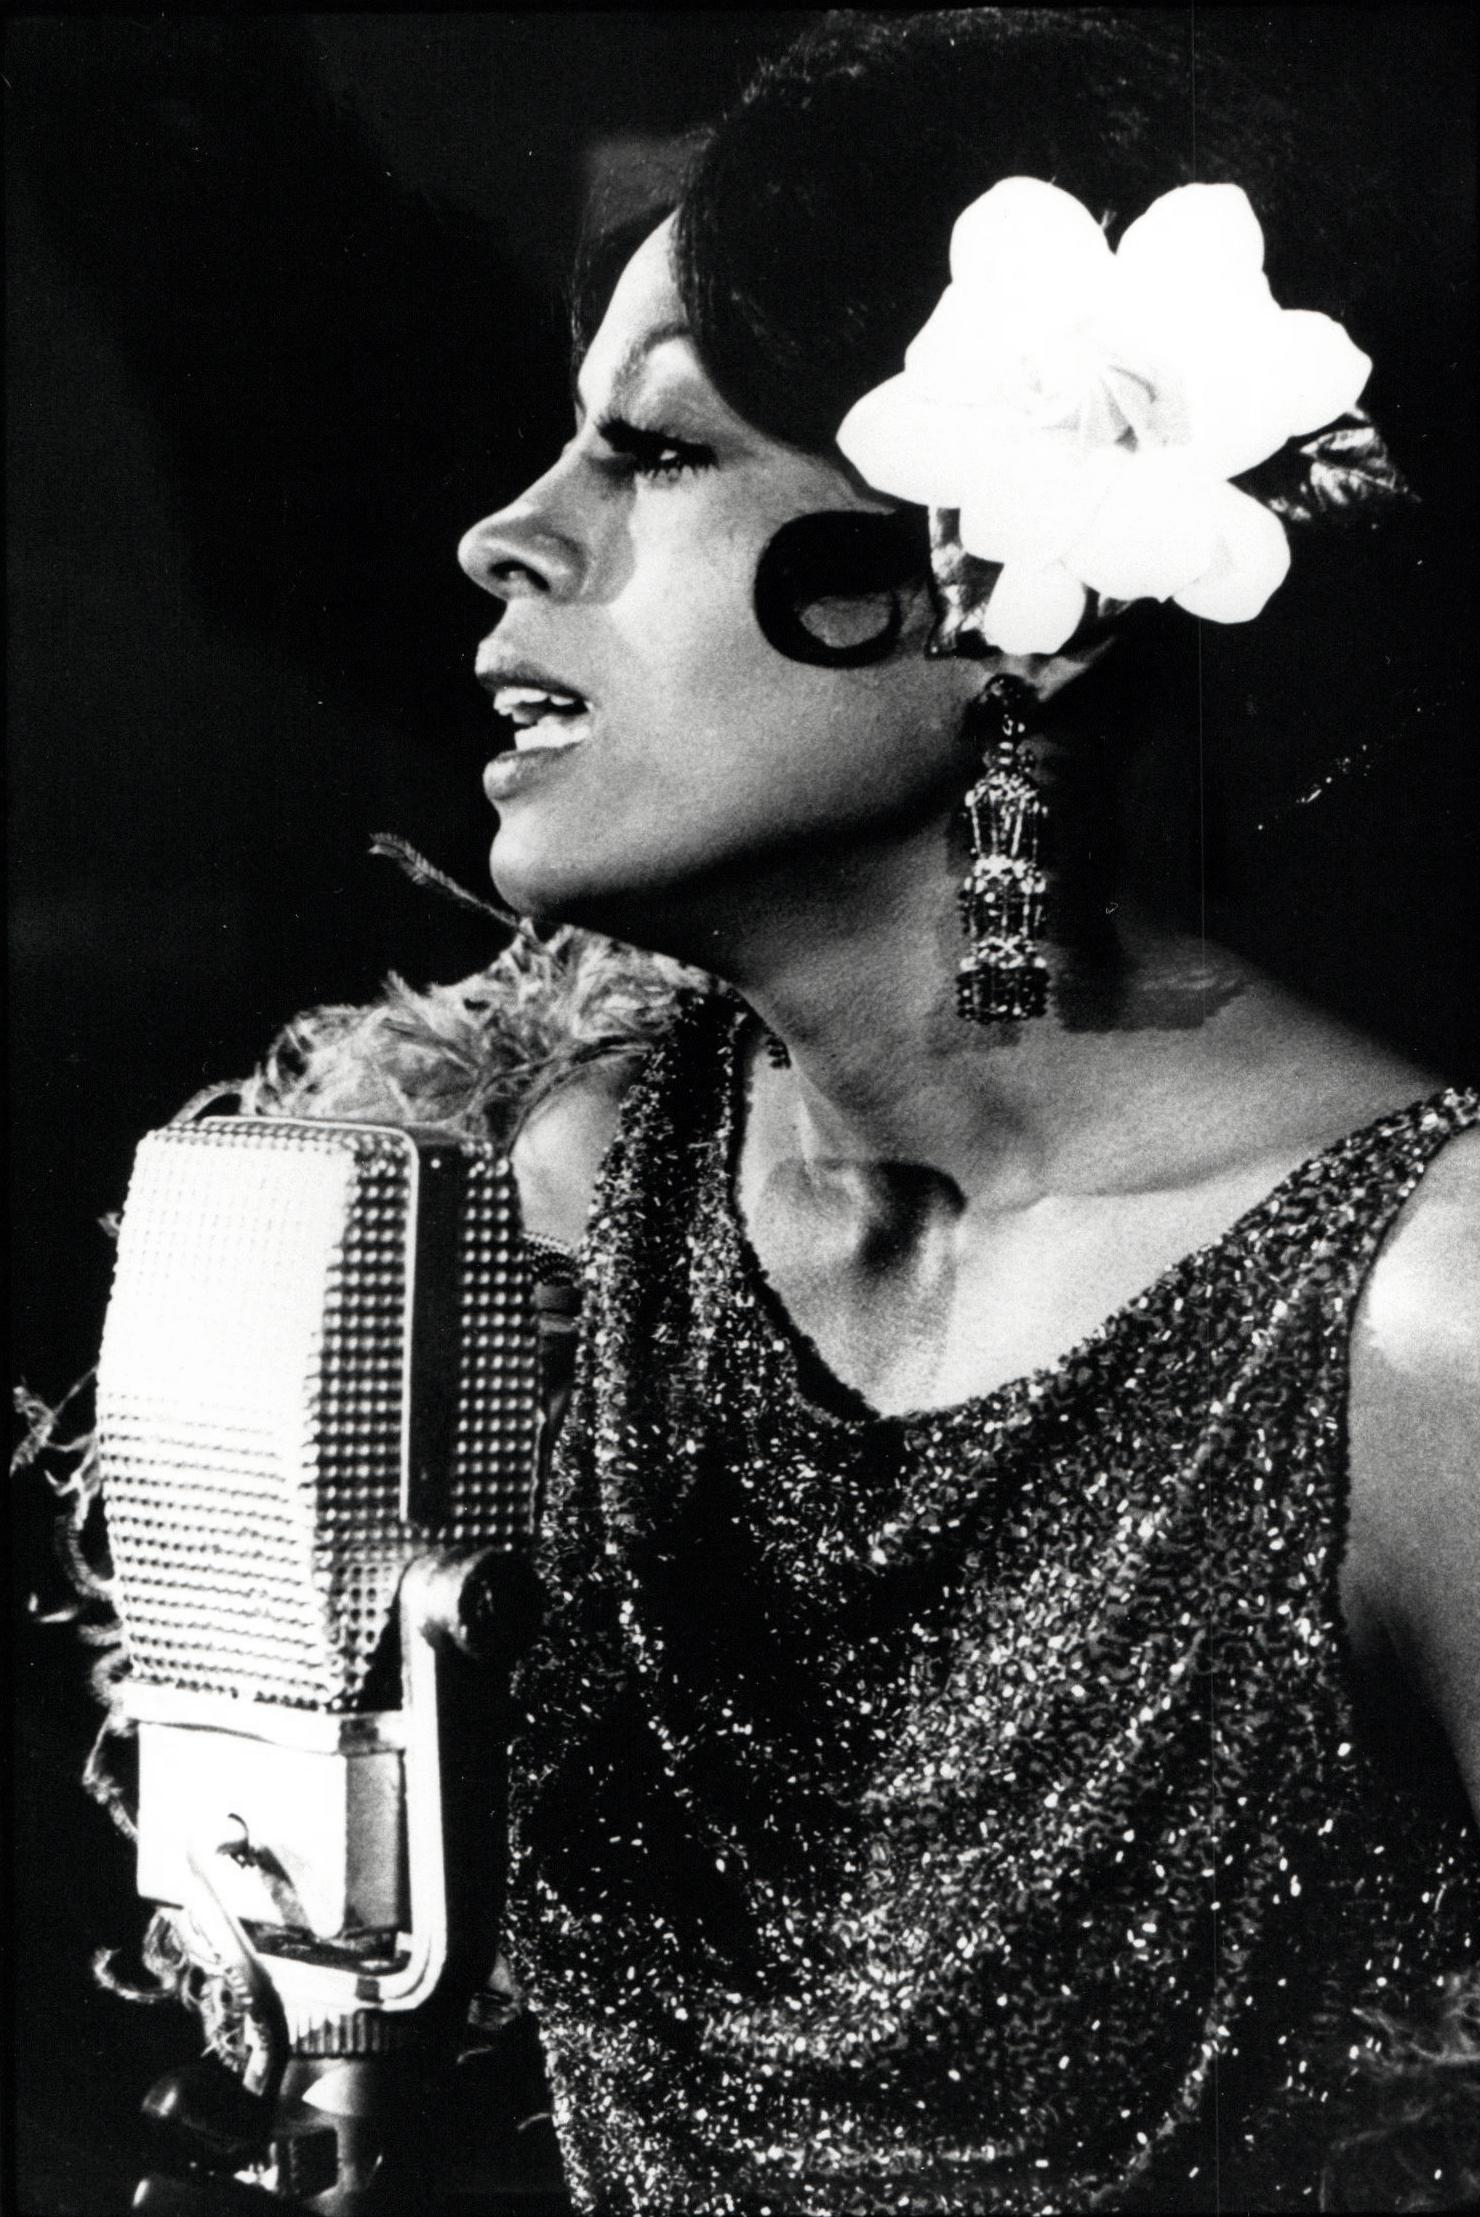 Unknown Black and White Photograph - Diana Ross Singing with Flower in Hair Vintage Original Photograph